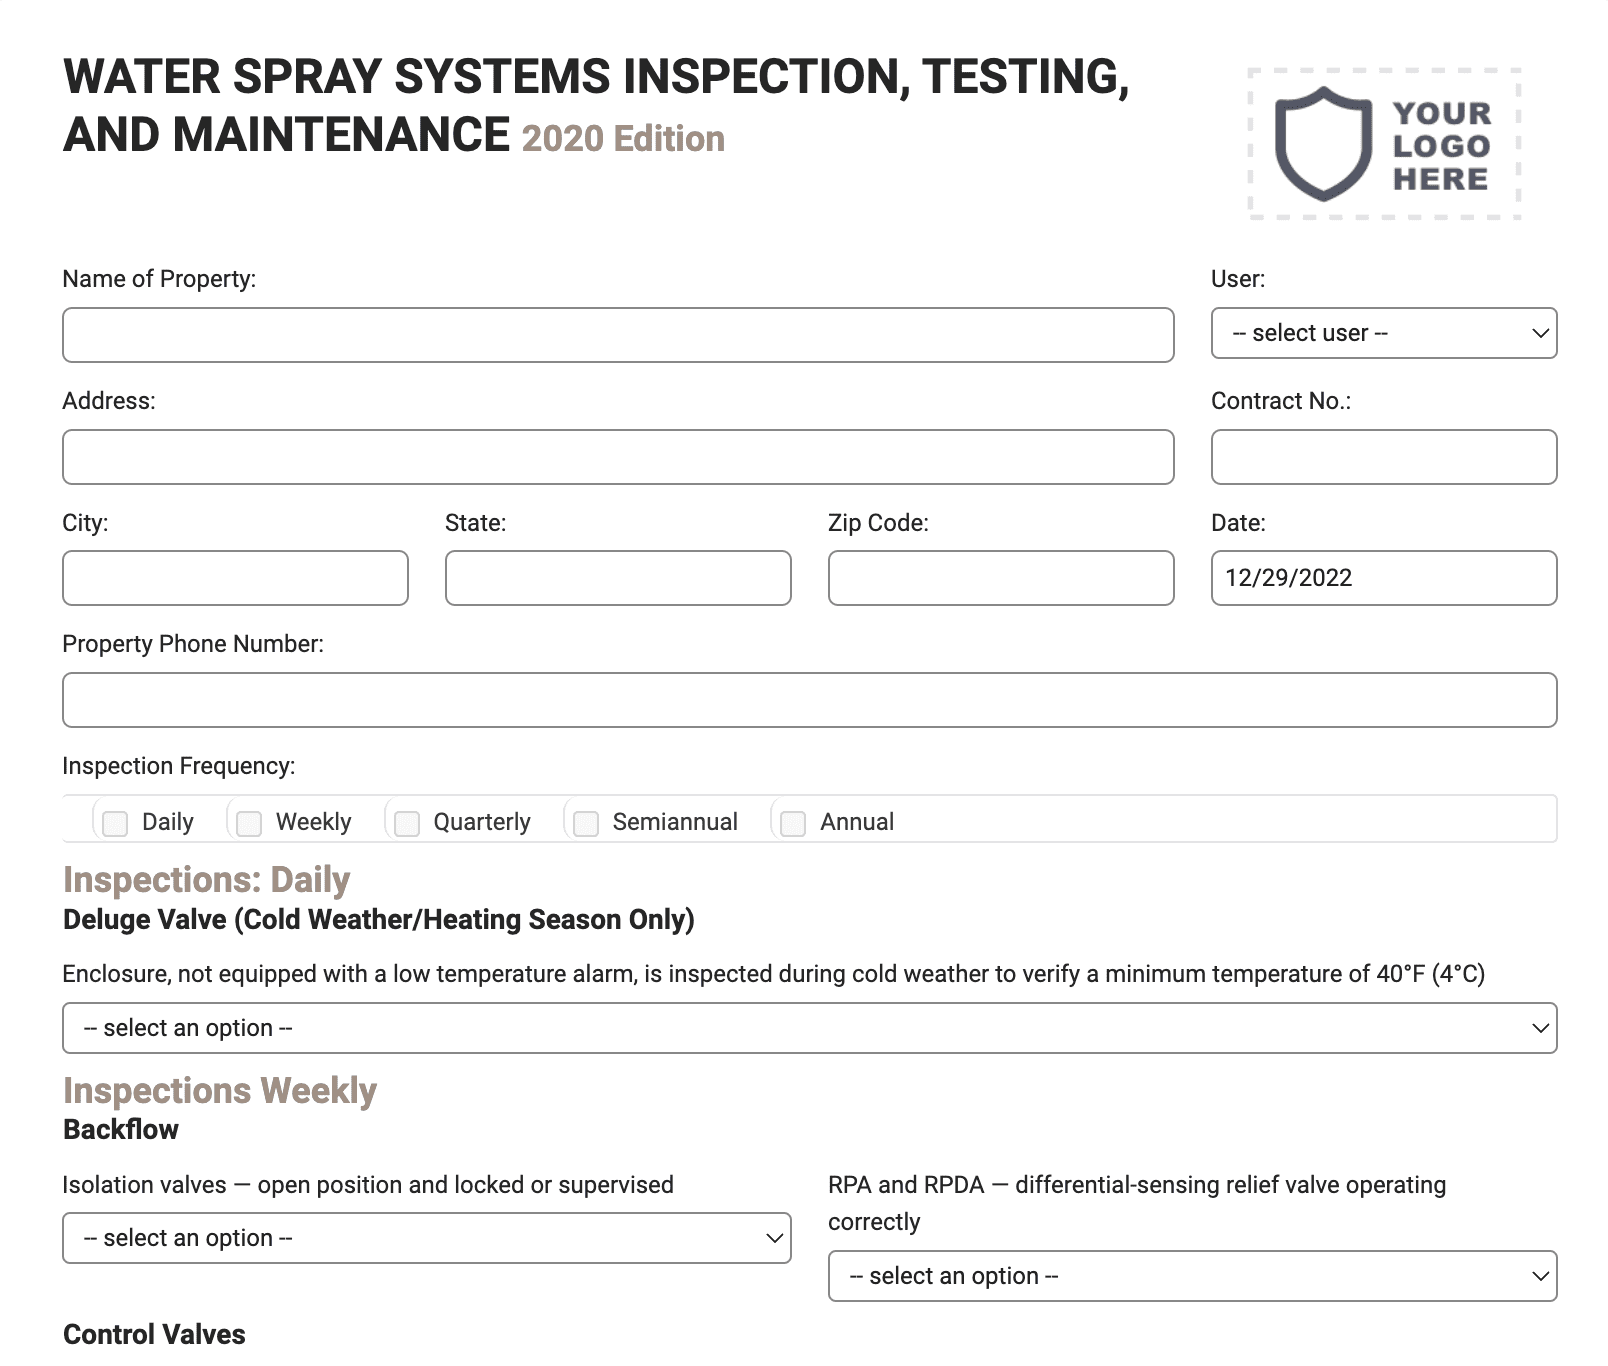 Water Spray Systems Inspection Form